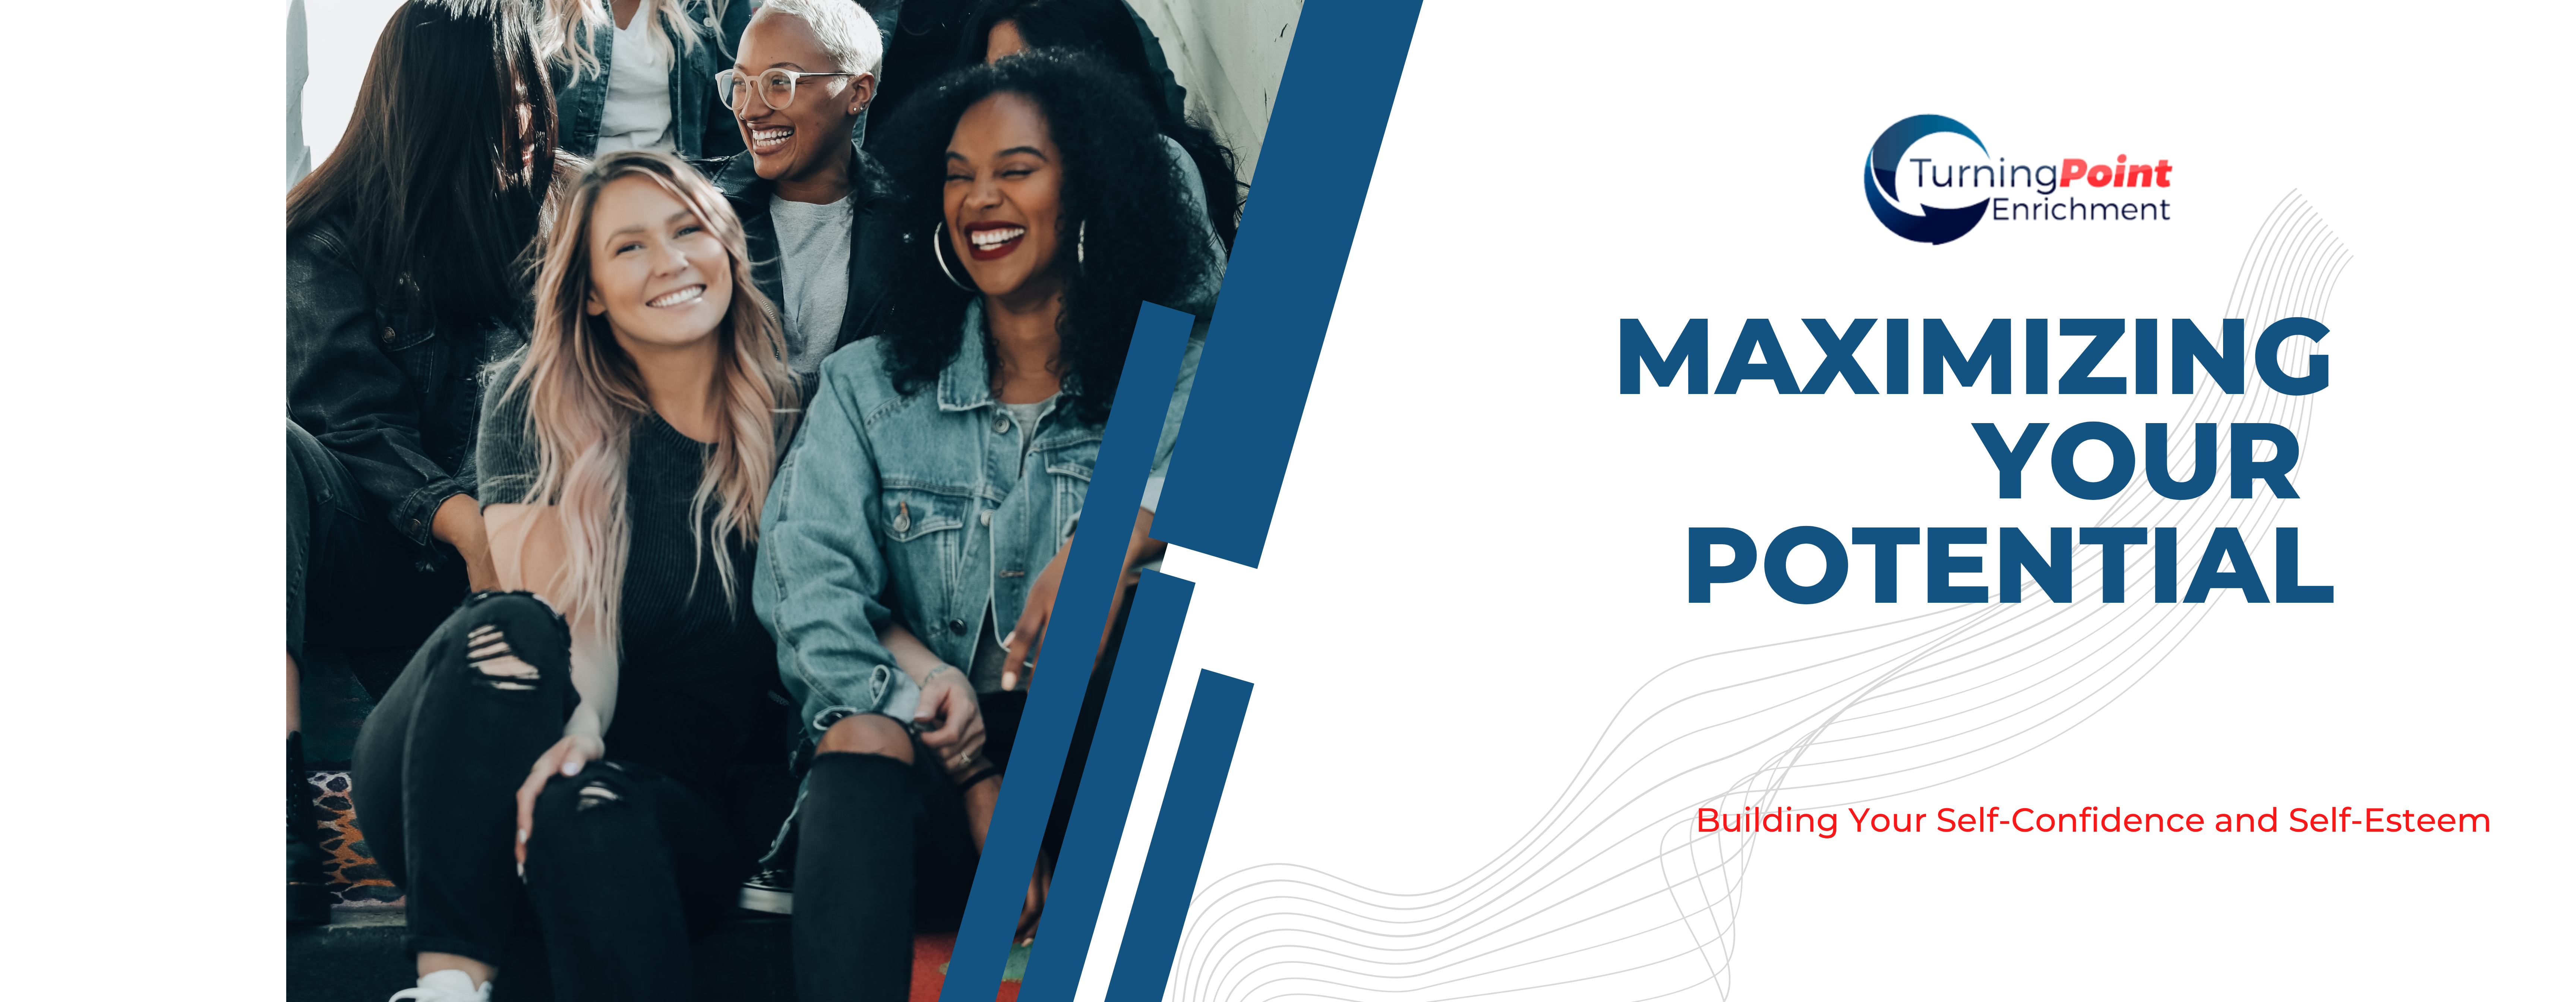 Maximizing Your Potential by building your self-confidence and self-esteem.  This course consists of 12 units designed to help you discover your truth and live a productive life.